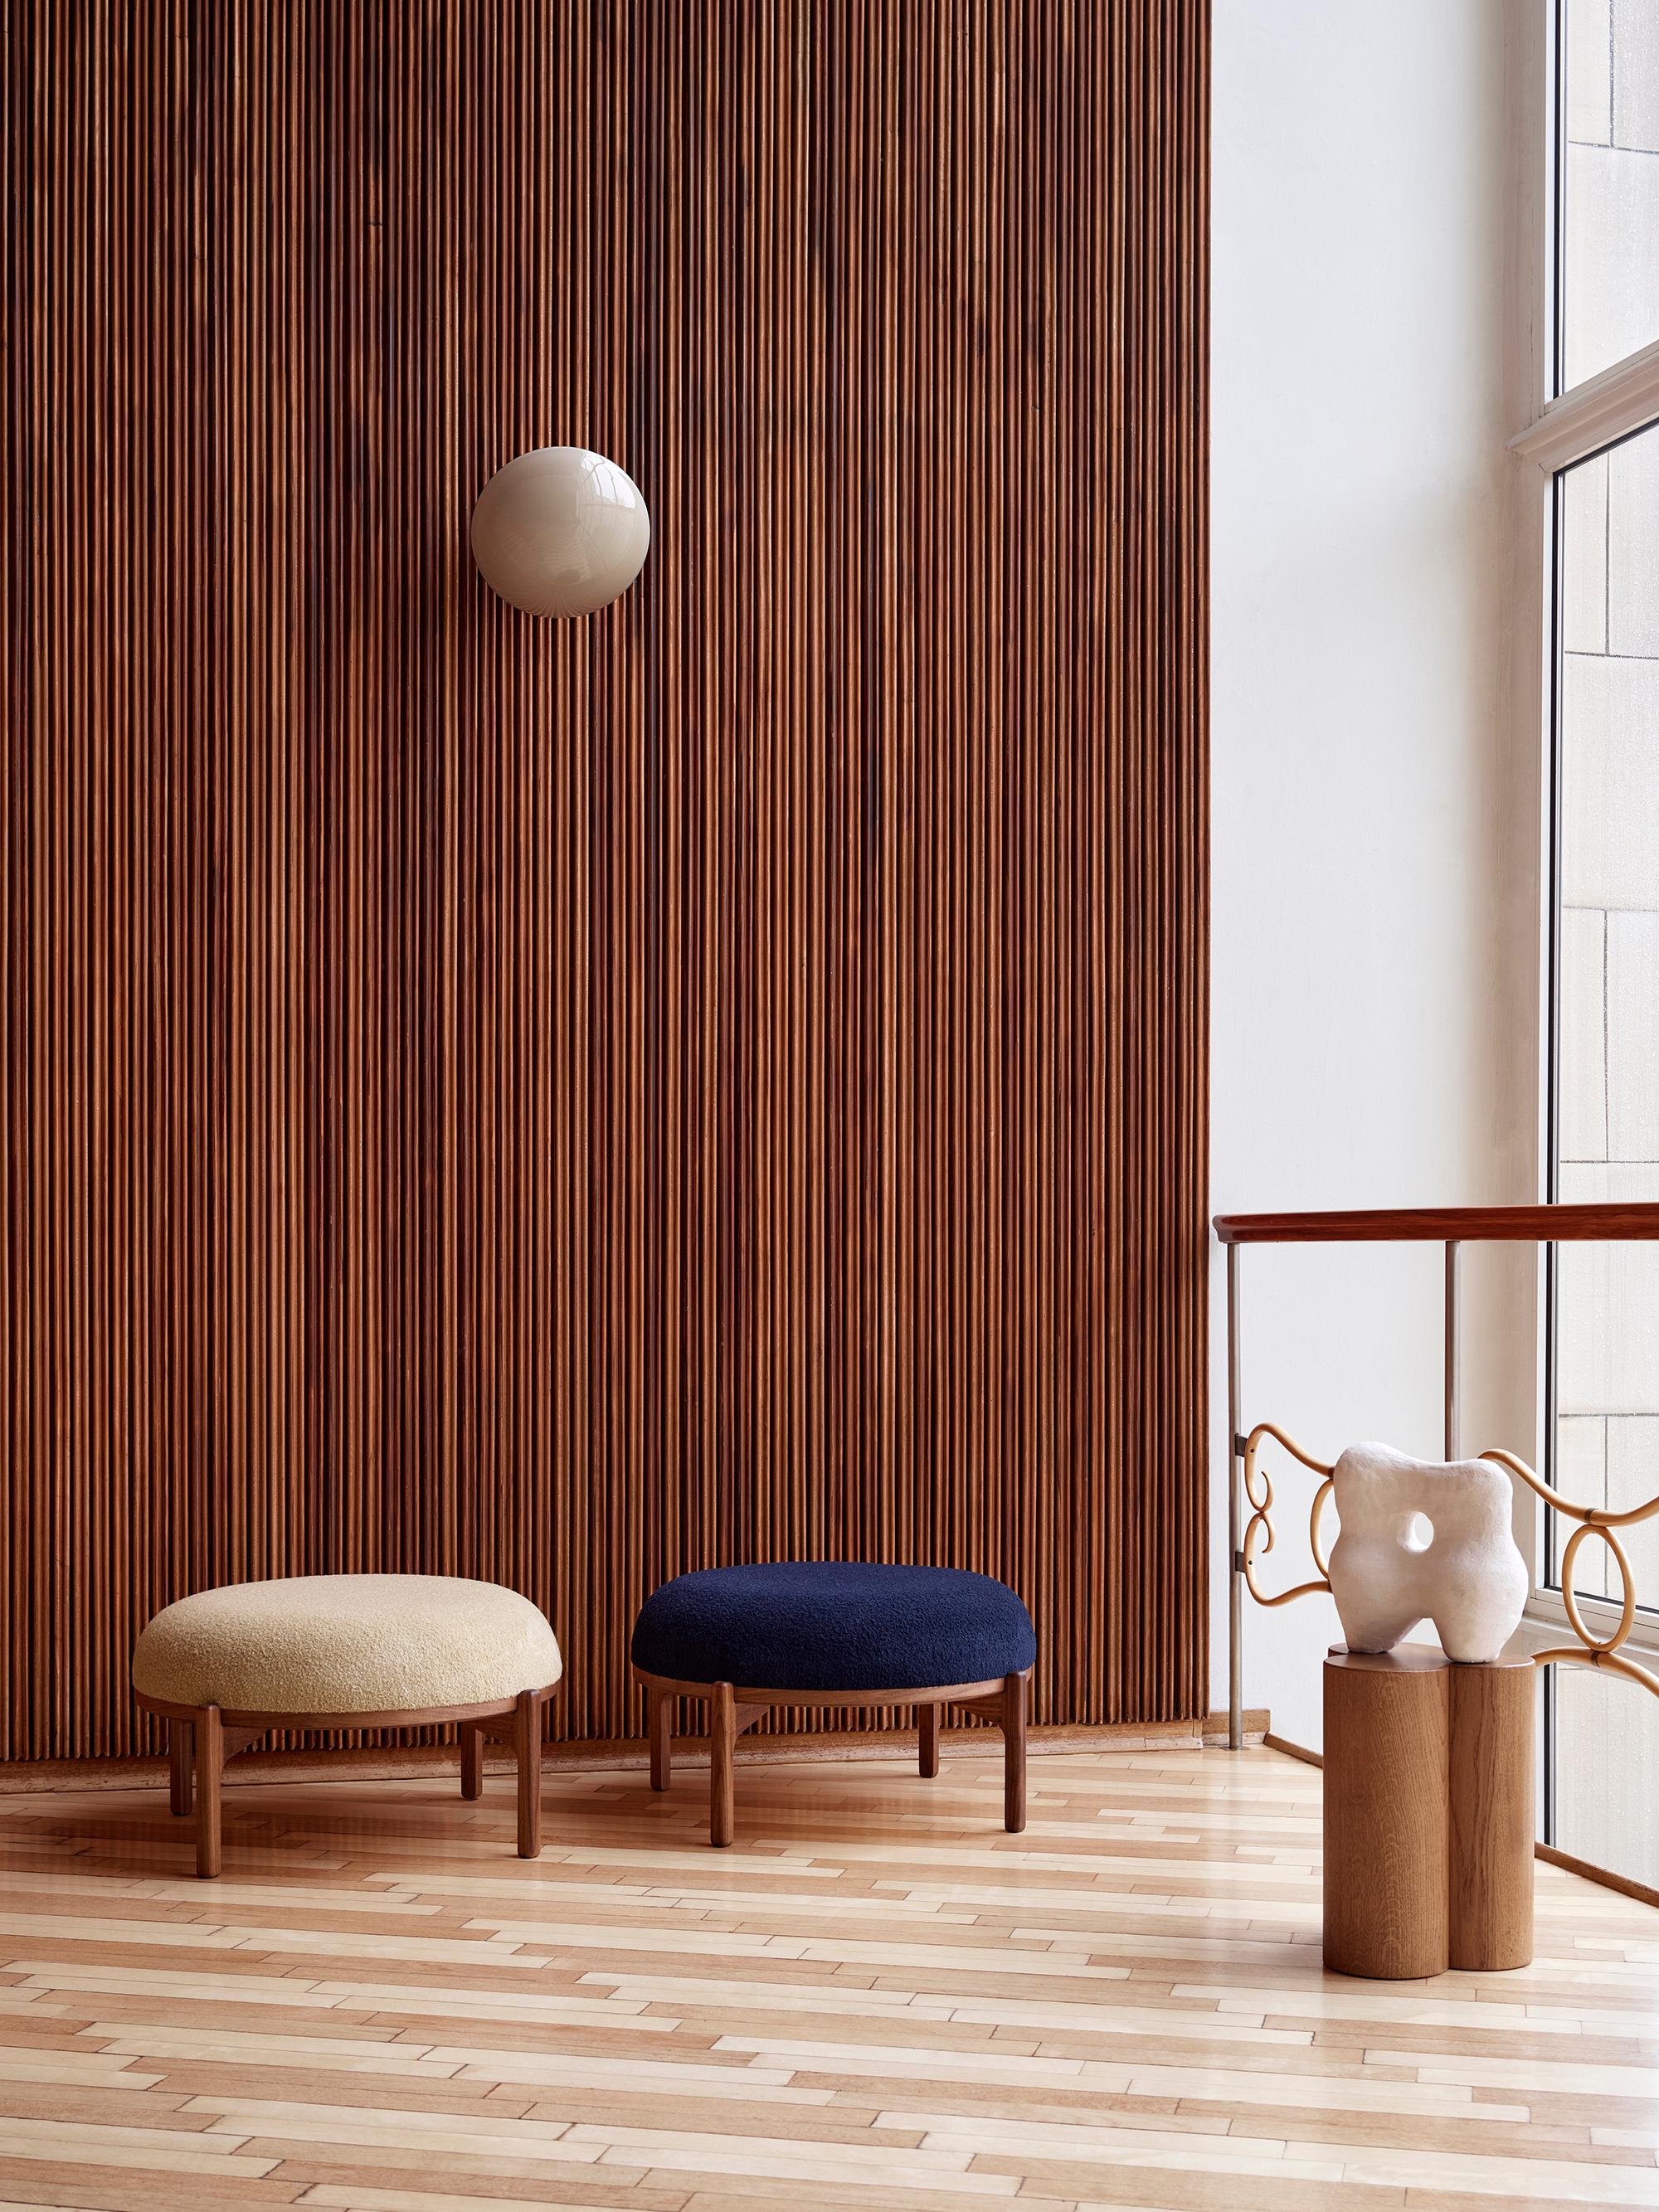 Rikke Frost 'RF1903F sideways footstool' in oiled walnut for Carl Hansen & Son.

The story of Danish Modern begins in 1908 when Carl Hansen opened his first workshop. His firm commitment to beauty, comfort, refinement, and craftsmanship is evident